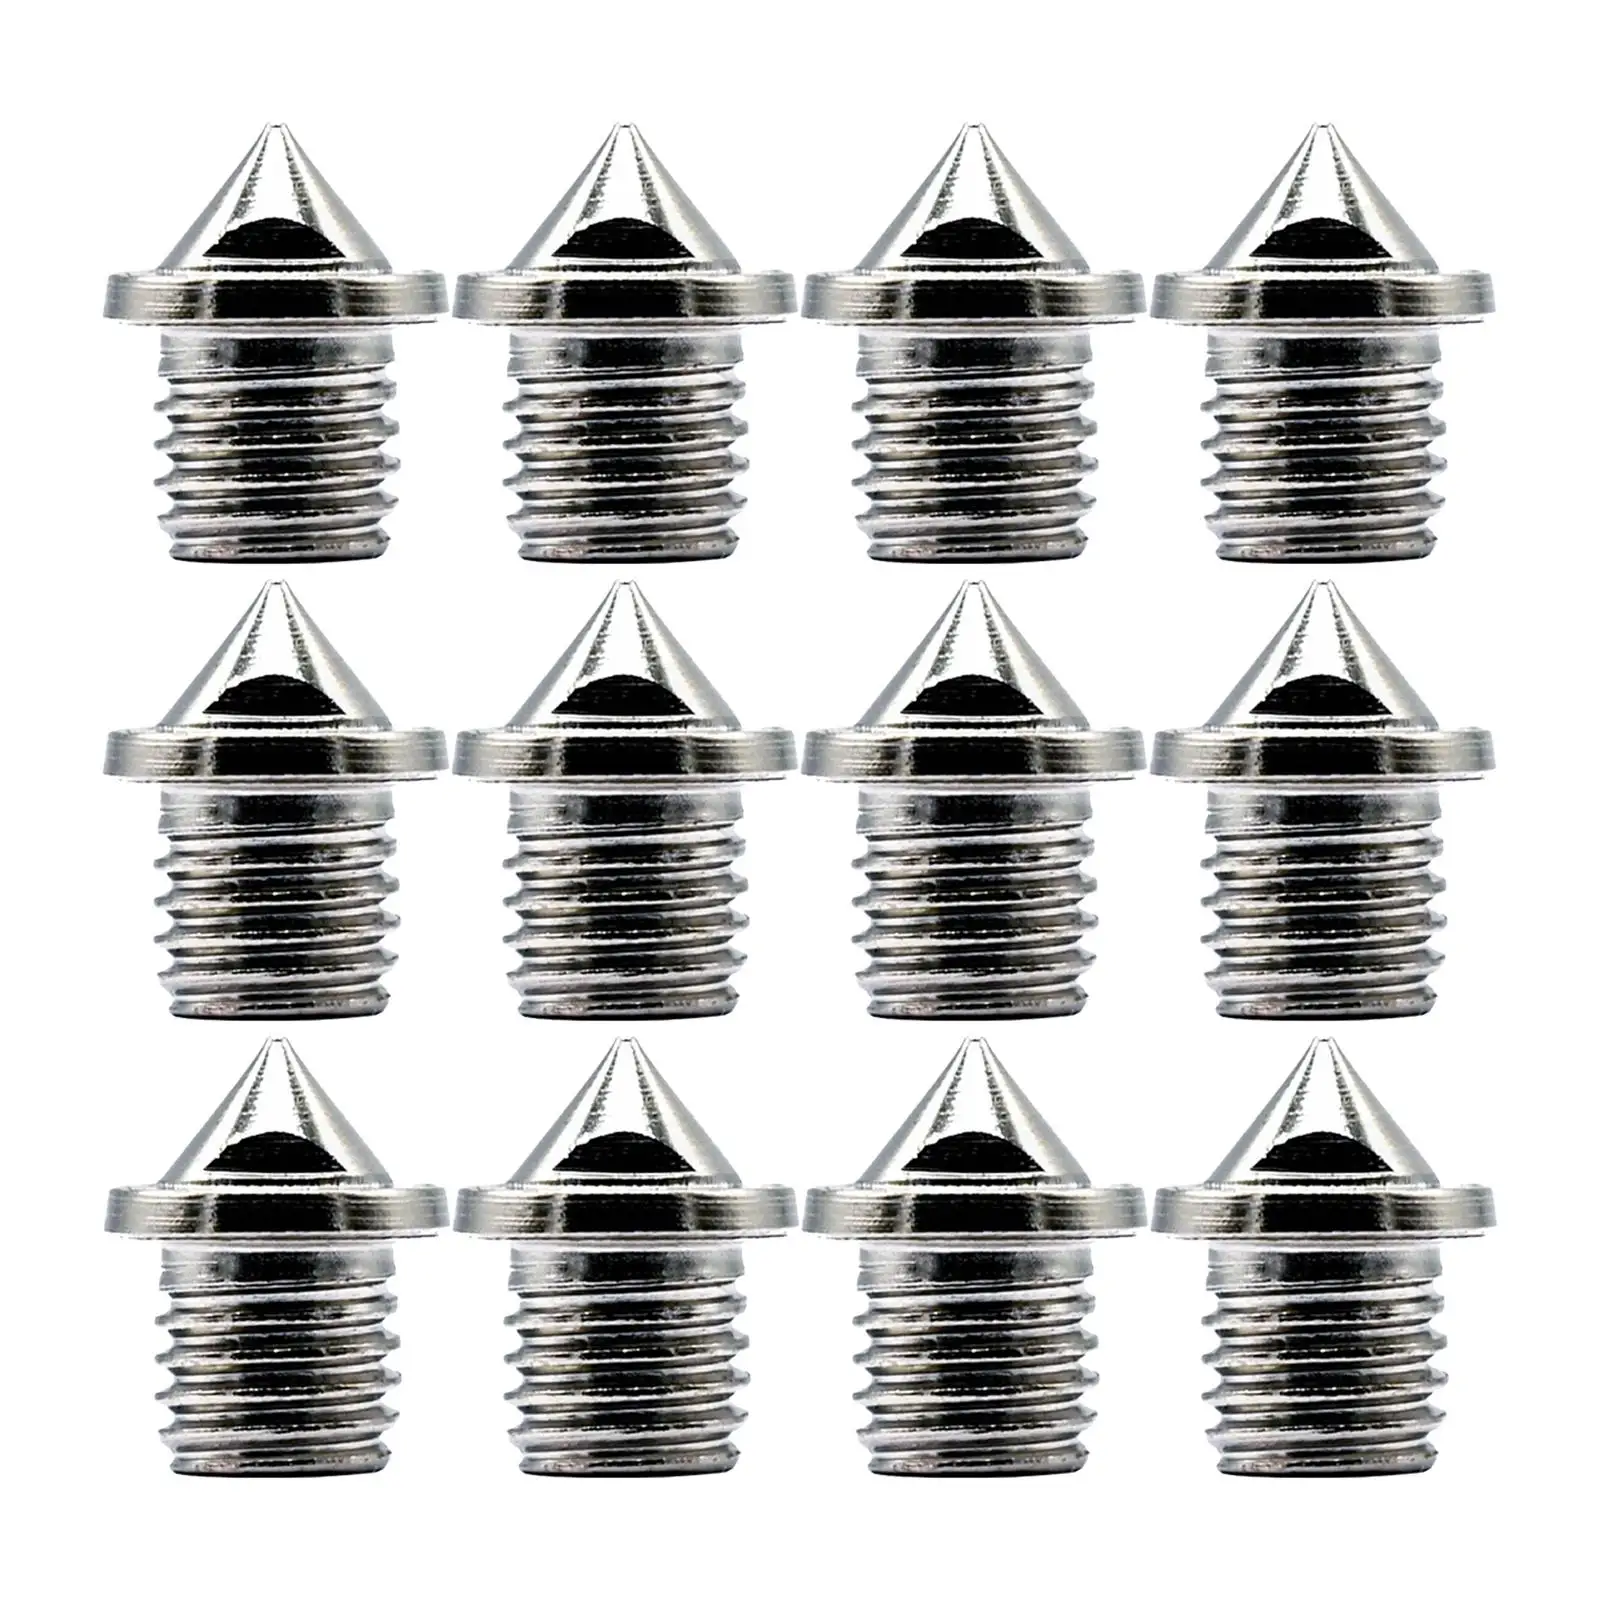 12 Pieces Track Spikes Sturdy Cross Country Sprint Sports Alloy Steel Spikes for Running Long Jump Climbing Jogging Backpacking